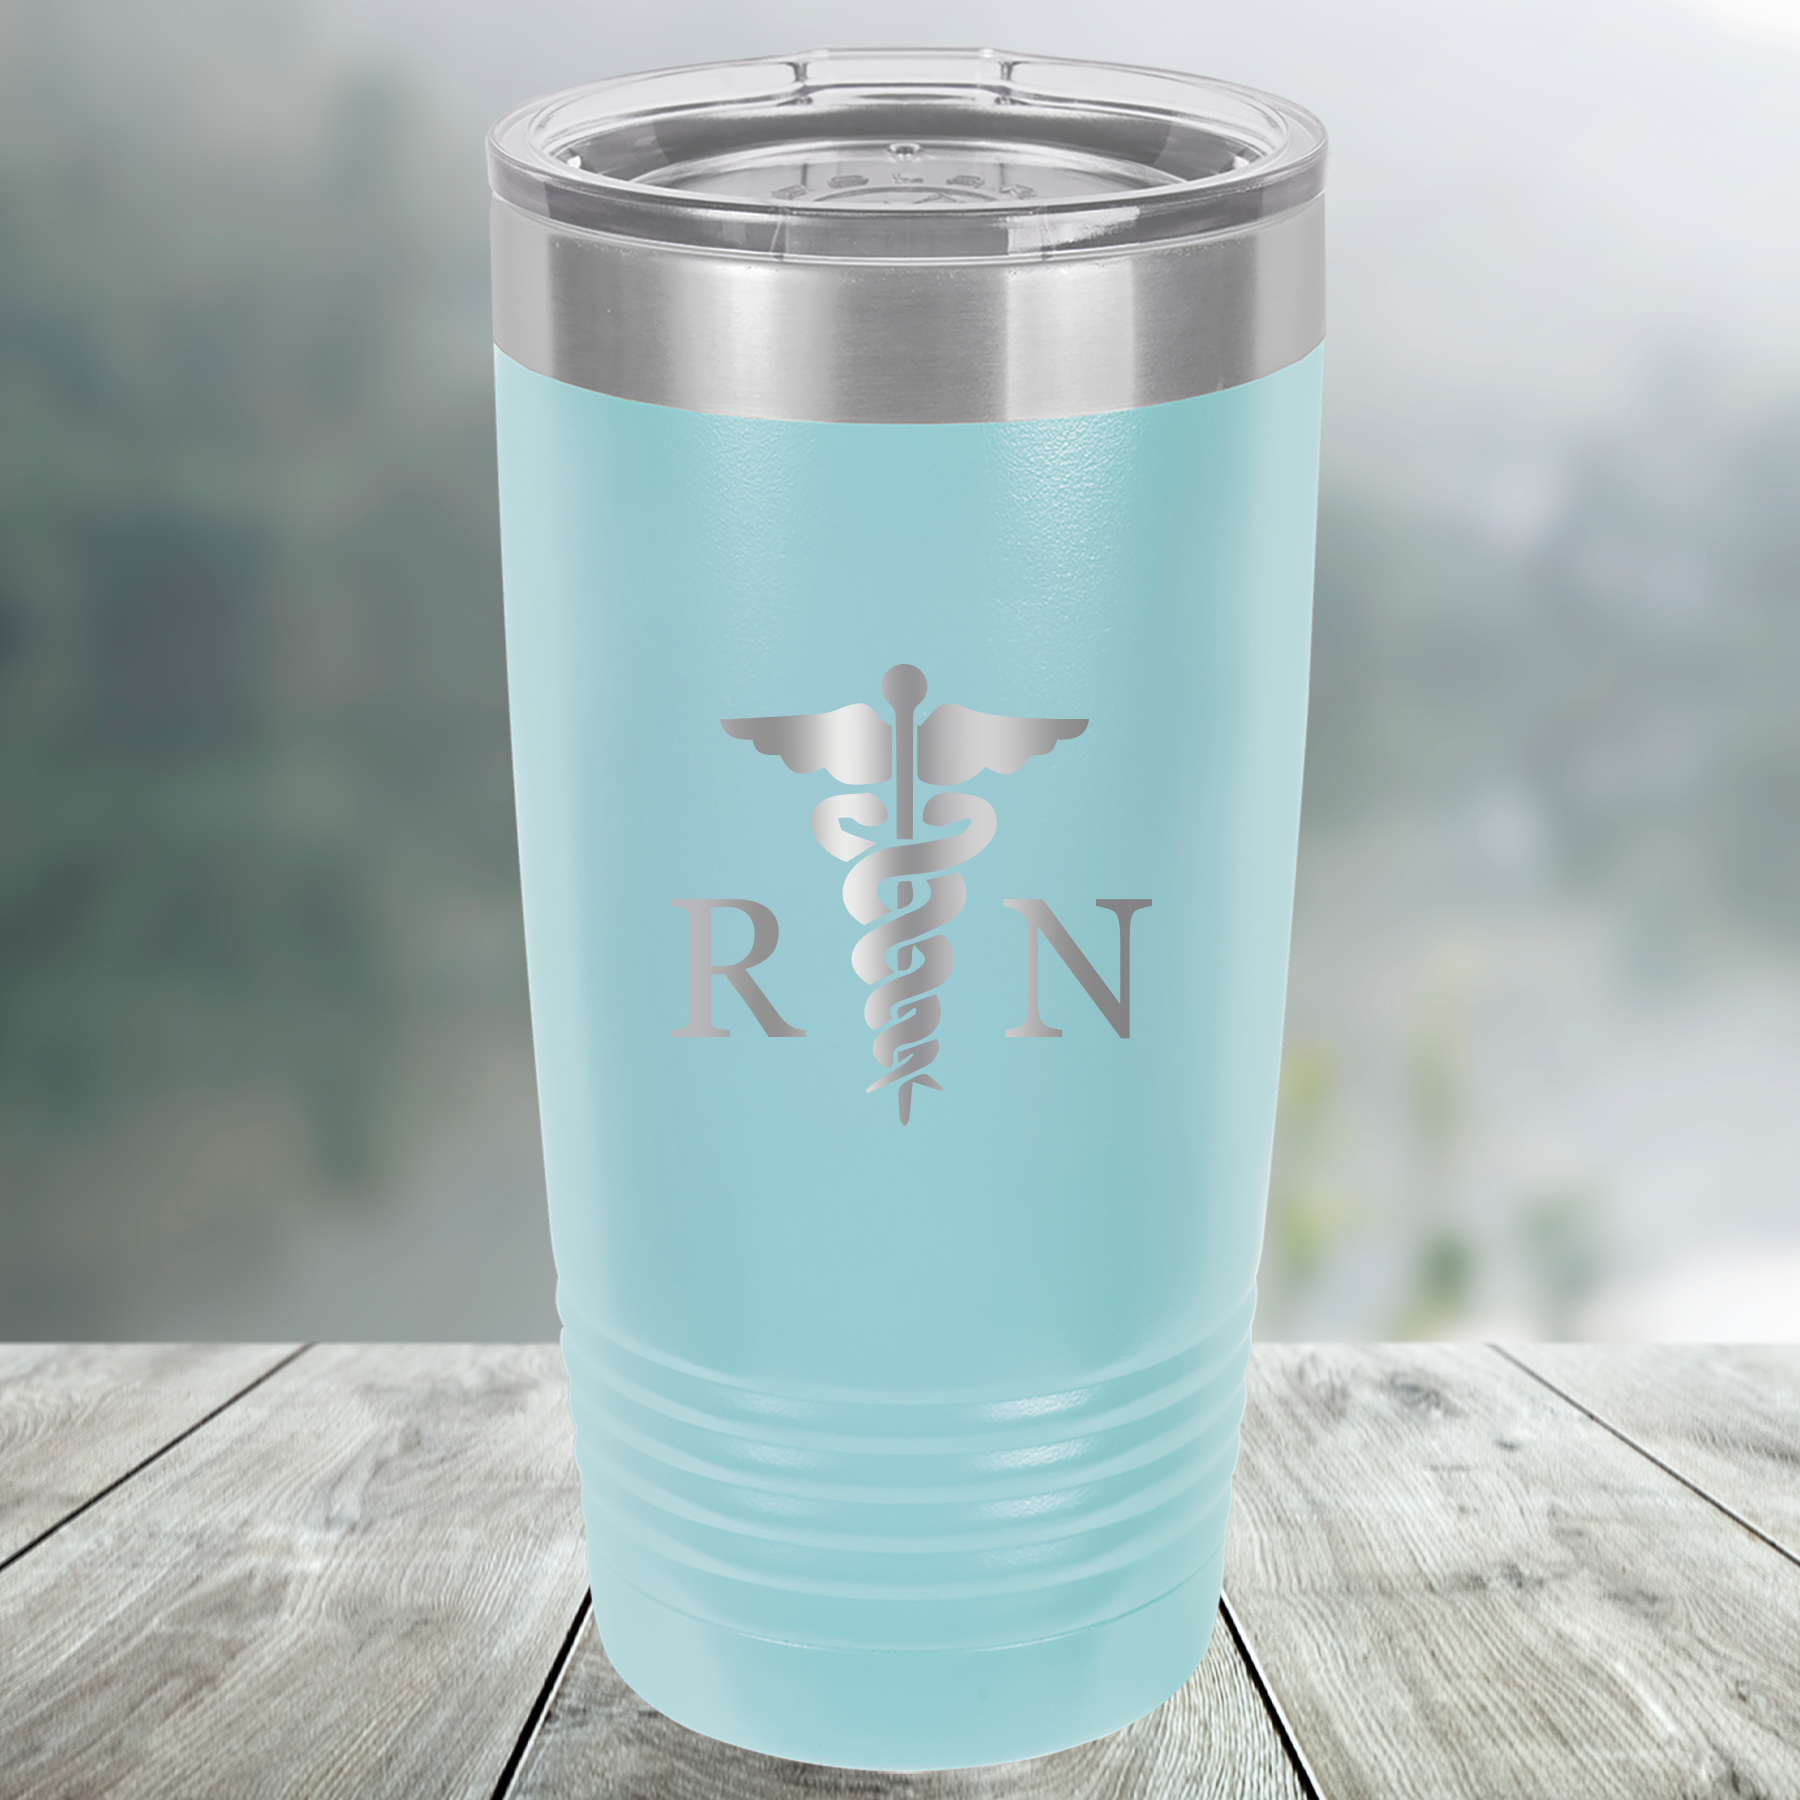 Registered Nurse - Engraved Personalized Tumbler With Name, Stainless Cup,  Nurse Gift